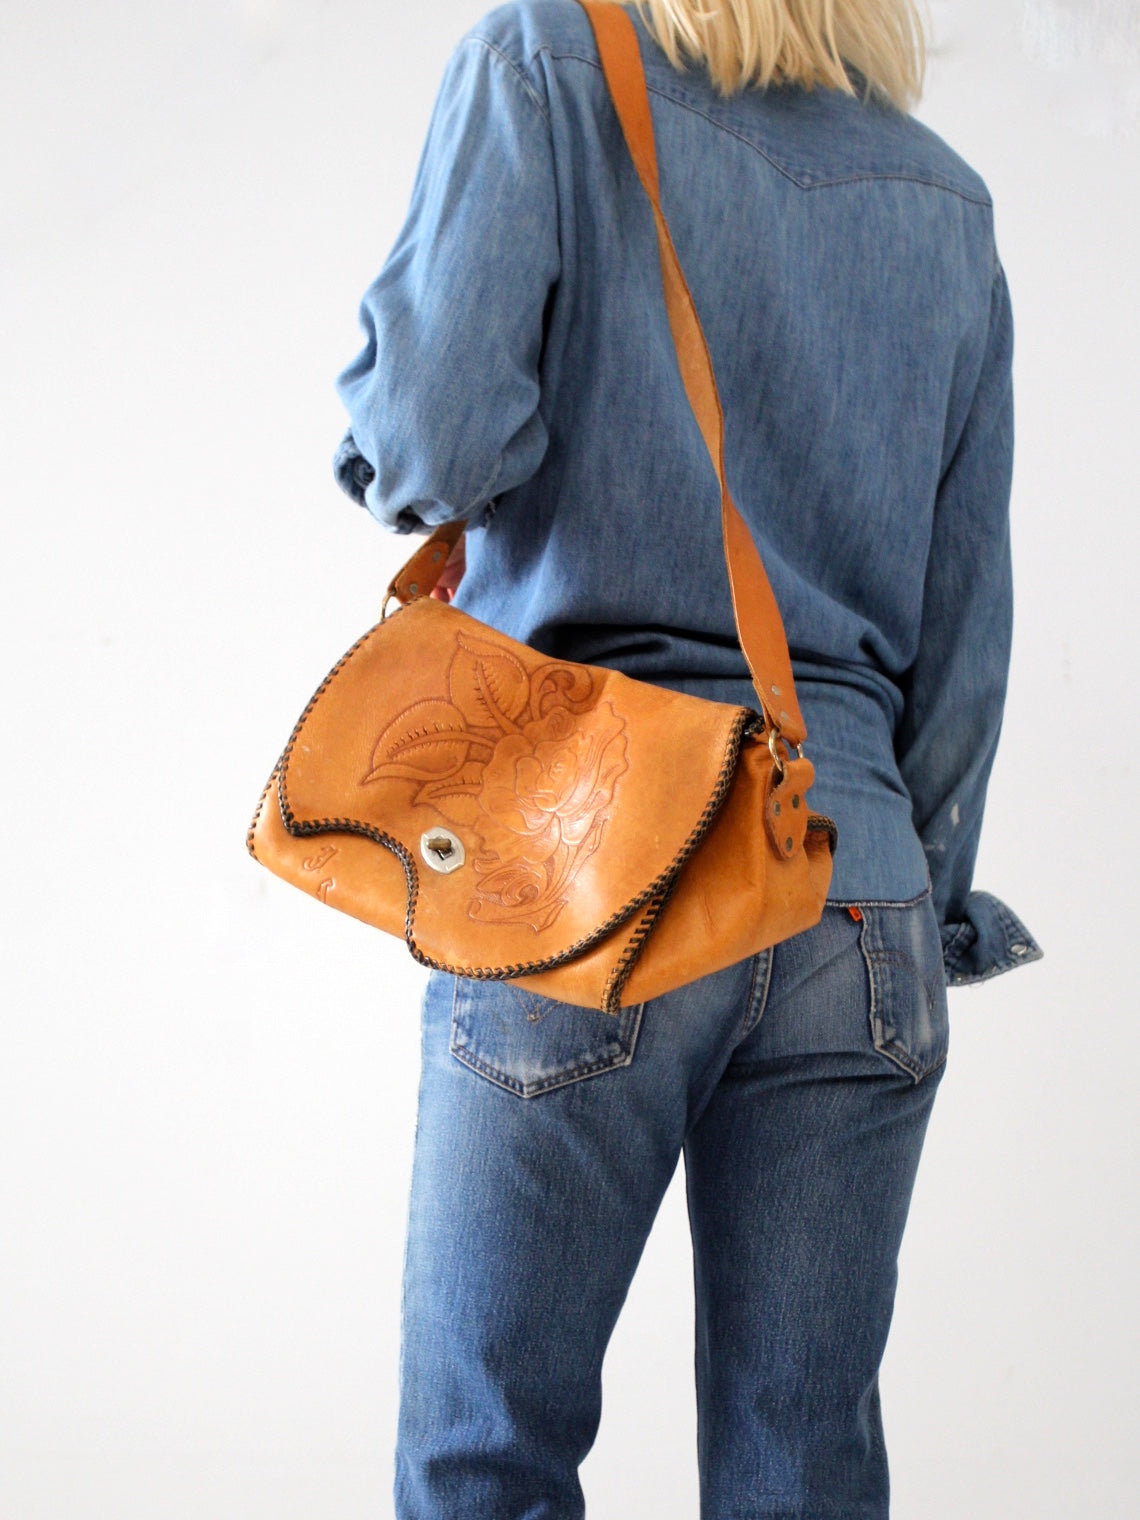 Vintage-Inspired Leather Messenger Bags Available In Many Sizes